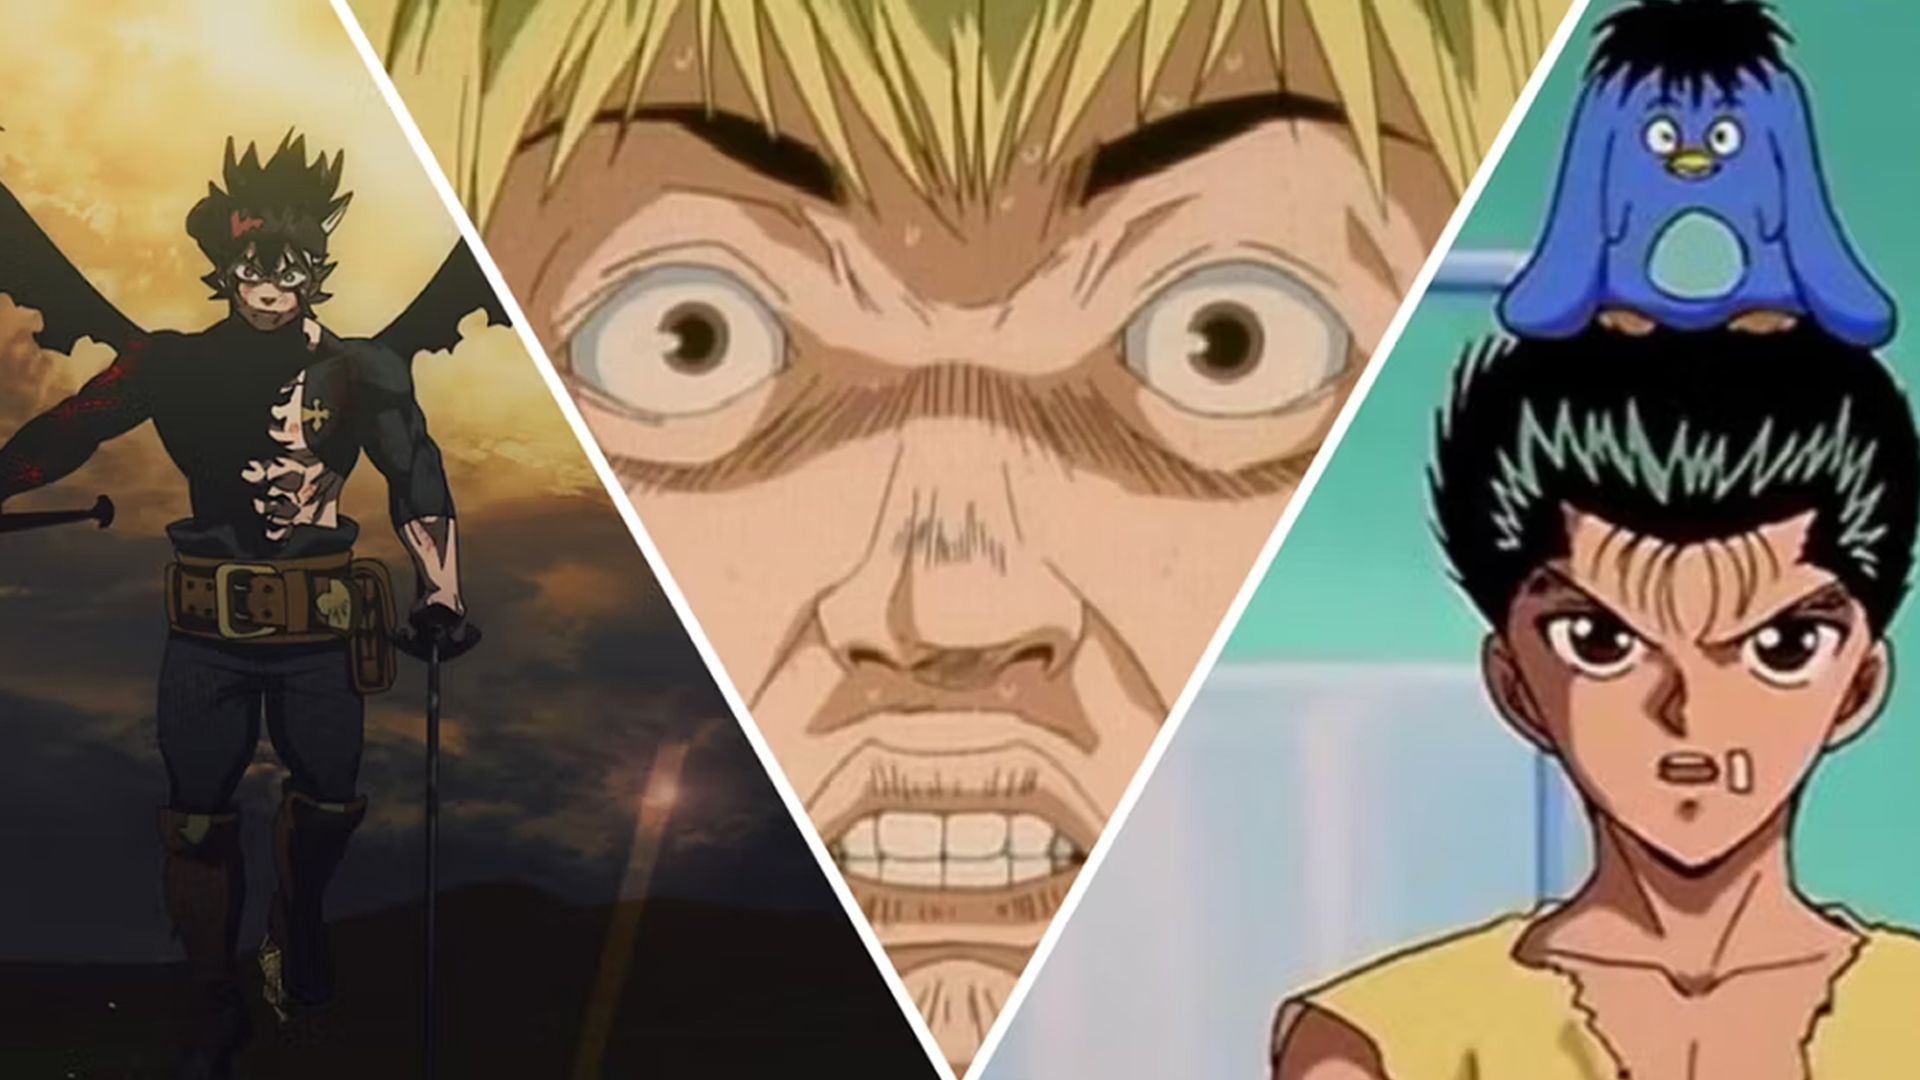 Top 15 Naruto Shippuden Opening Songs According to CBR Pt 2